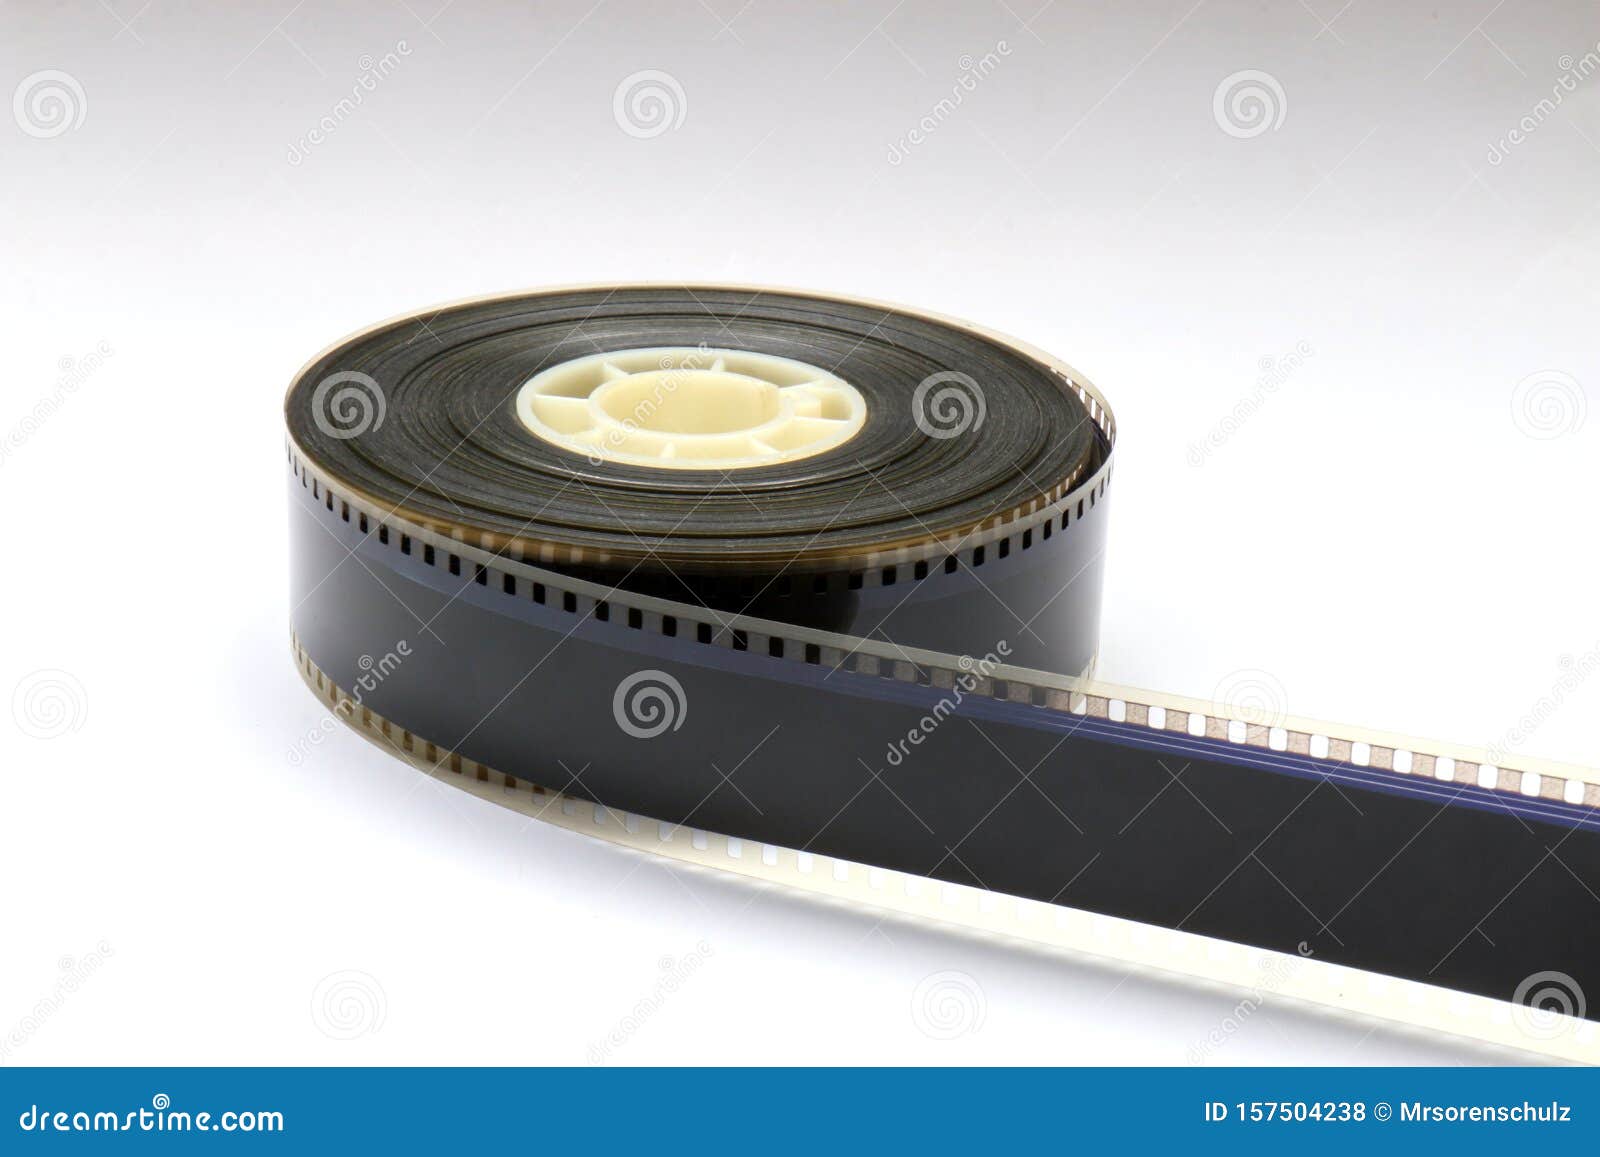 Small 35mm Movie Trailer Film Roll on a Bobby. this is a 2-3 Minute Long Film  Strip Stock Photo - Image of moviemaking, cinema: 157504238